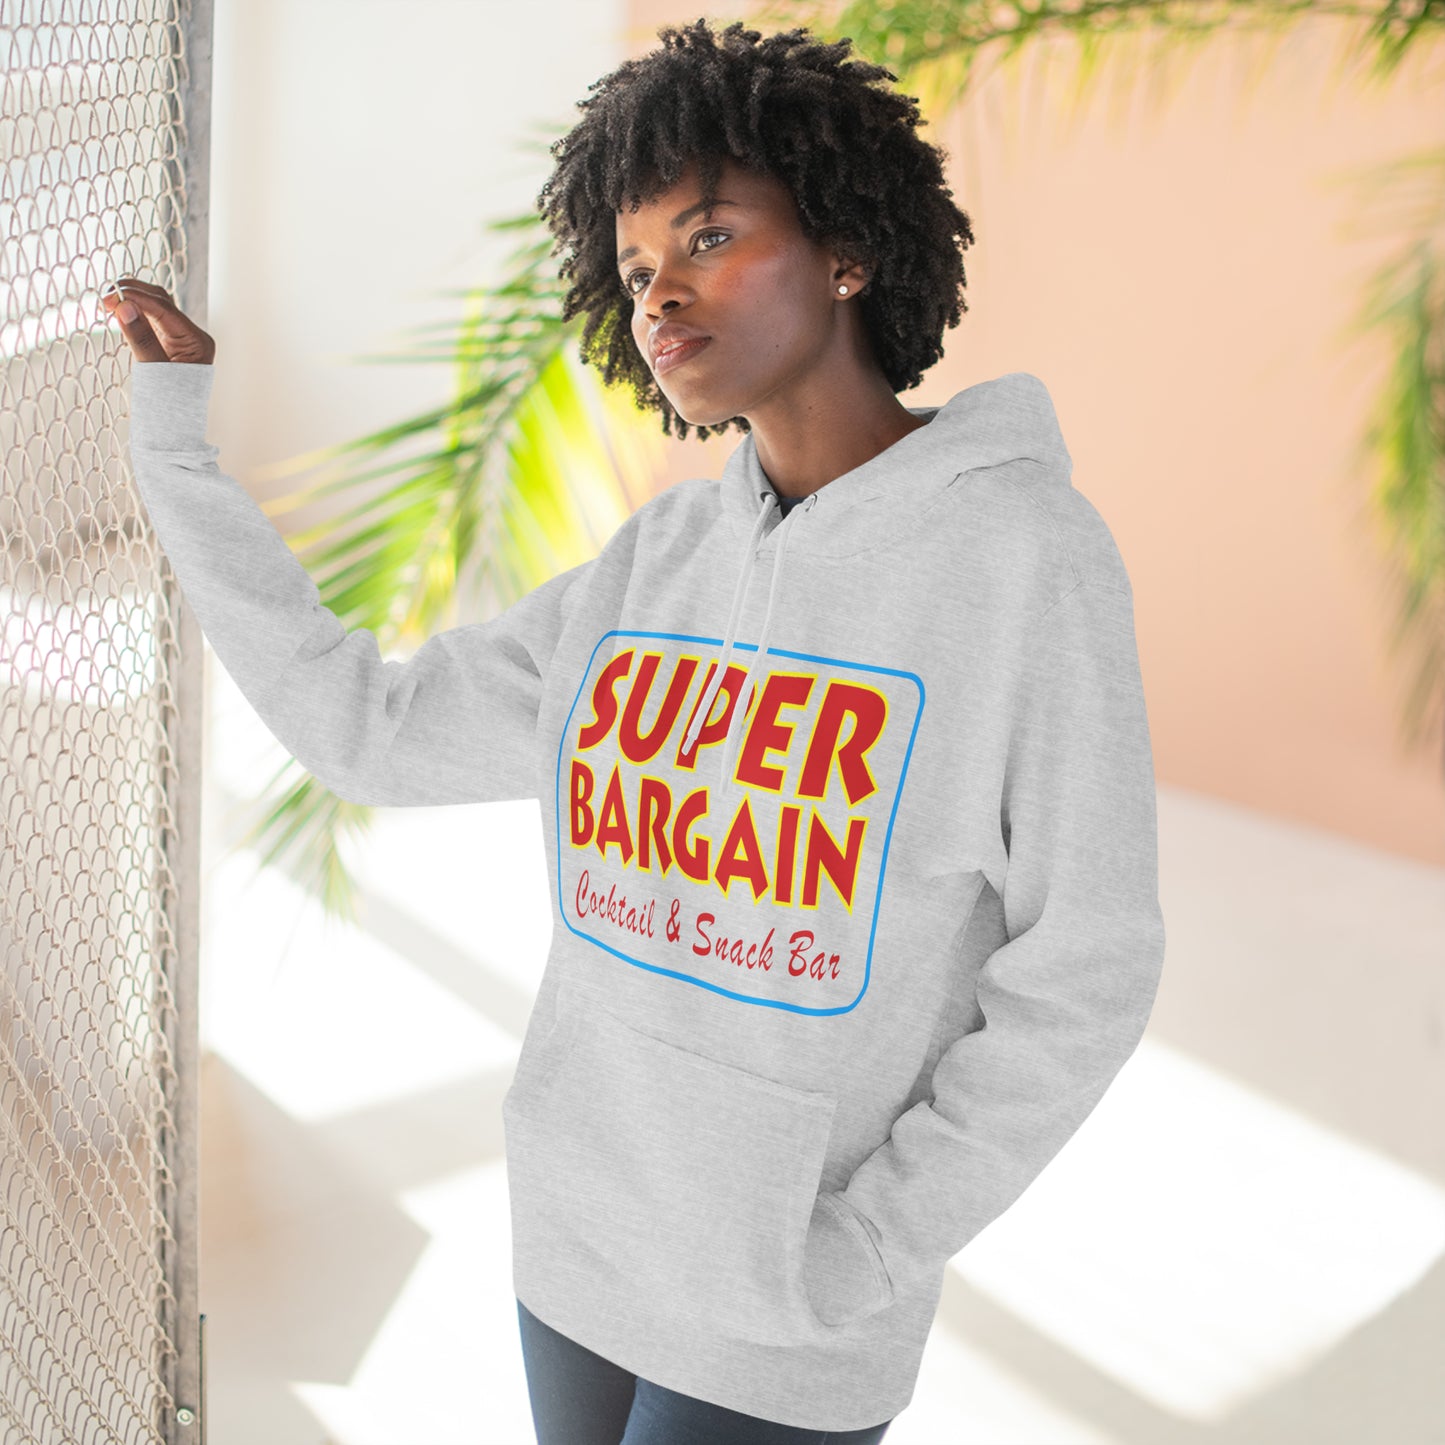 A woman with curly hair wearing a gray Printify Unisex Premium Pullover Hoodie printed with "Super Bargain Cereal & Snack Bar" stands by a metallic fence in Cabbagetown, Toronto, looking thoughtfully to the side, with tropical plants in the background.